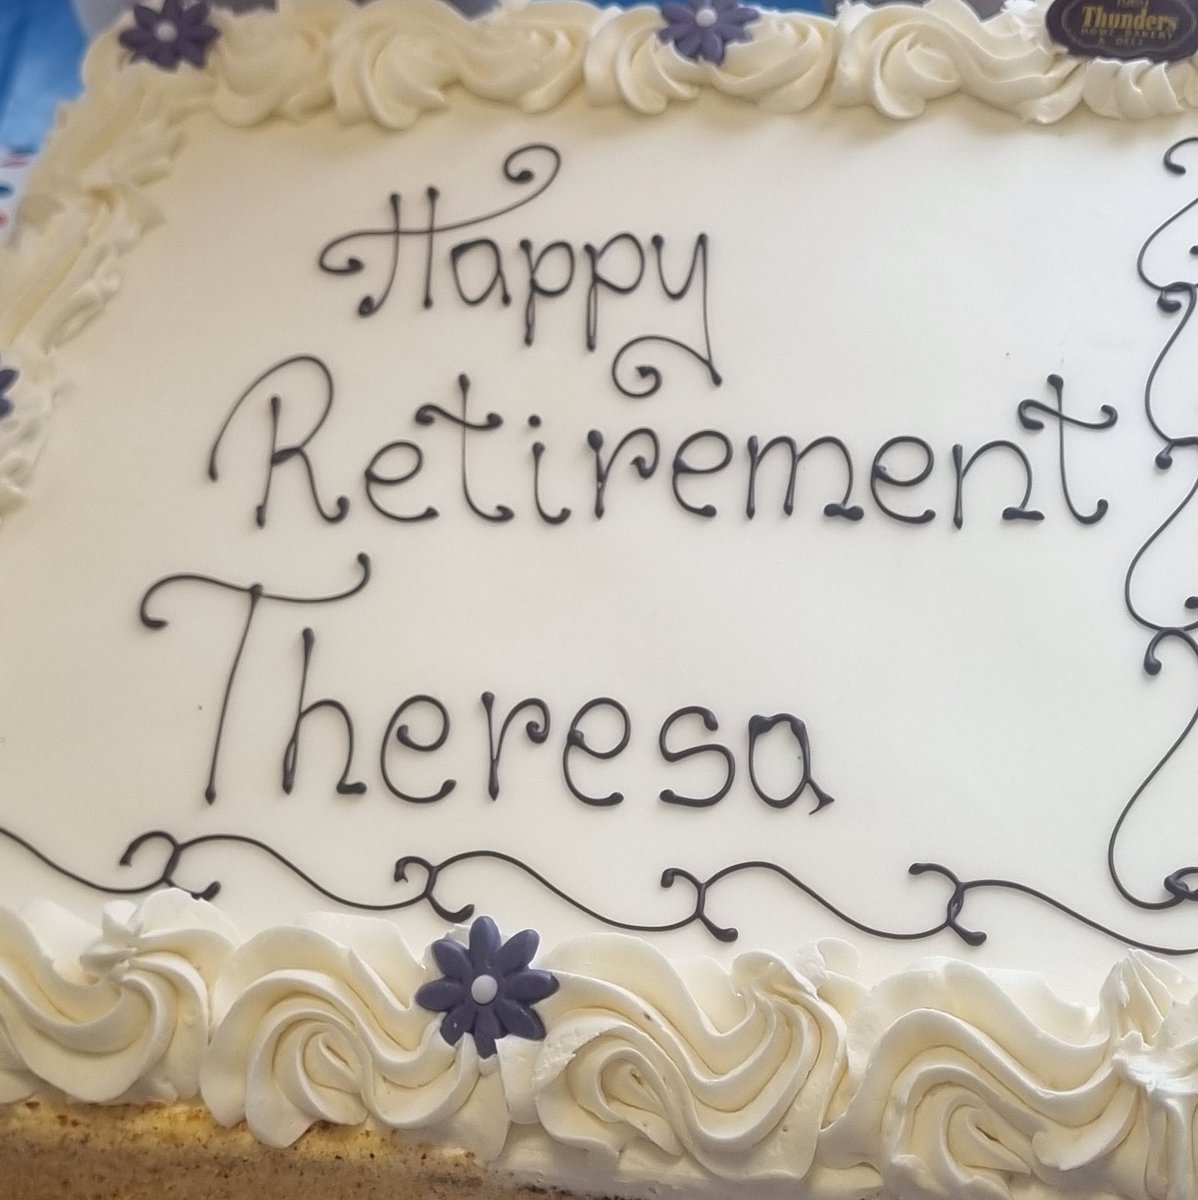 Today we say farewell & happy retirement to one of our amazing admin staff who has worked here for over 40 years. She's seen a lot of physios come through the department & has kept OPD running like clockwork. Theresa you'll be missed but enjoy your retirement x